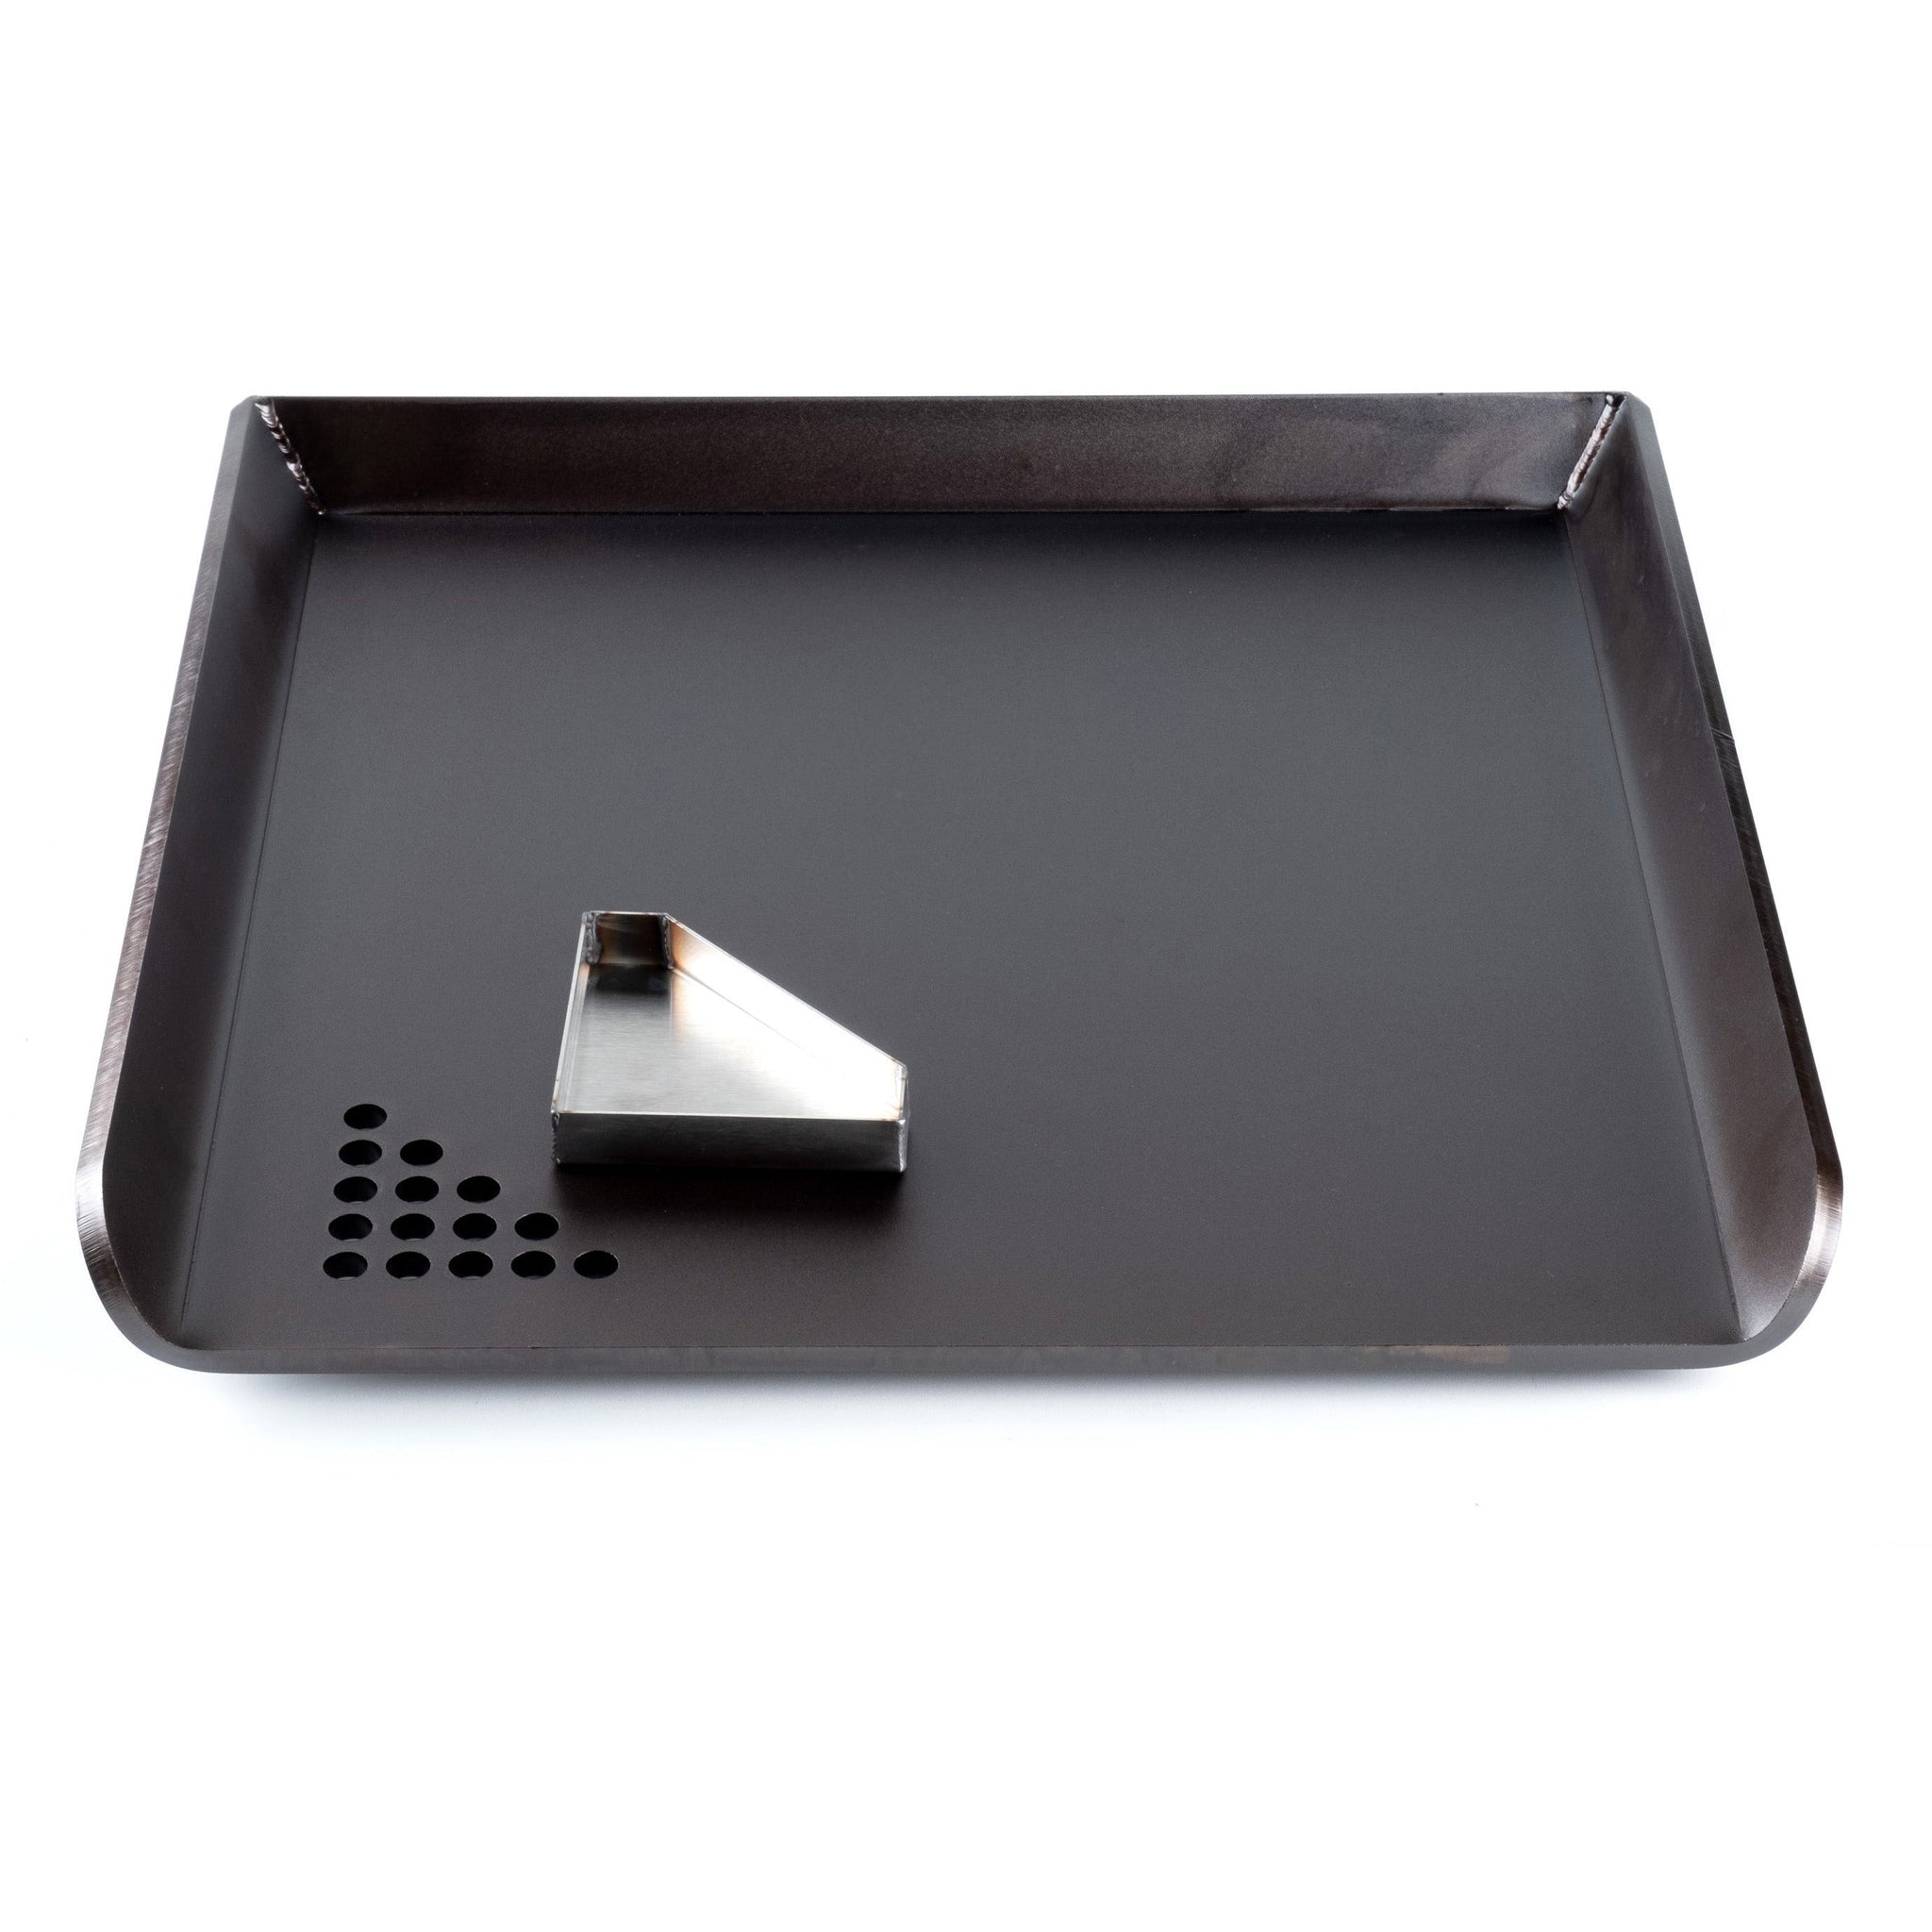 PRO Series Flat Top Griddle For Your Kitchen Stove - Steelmade